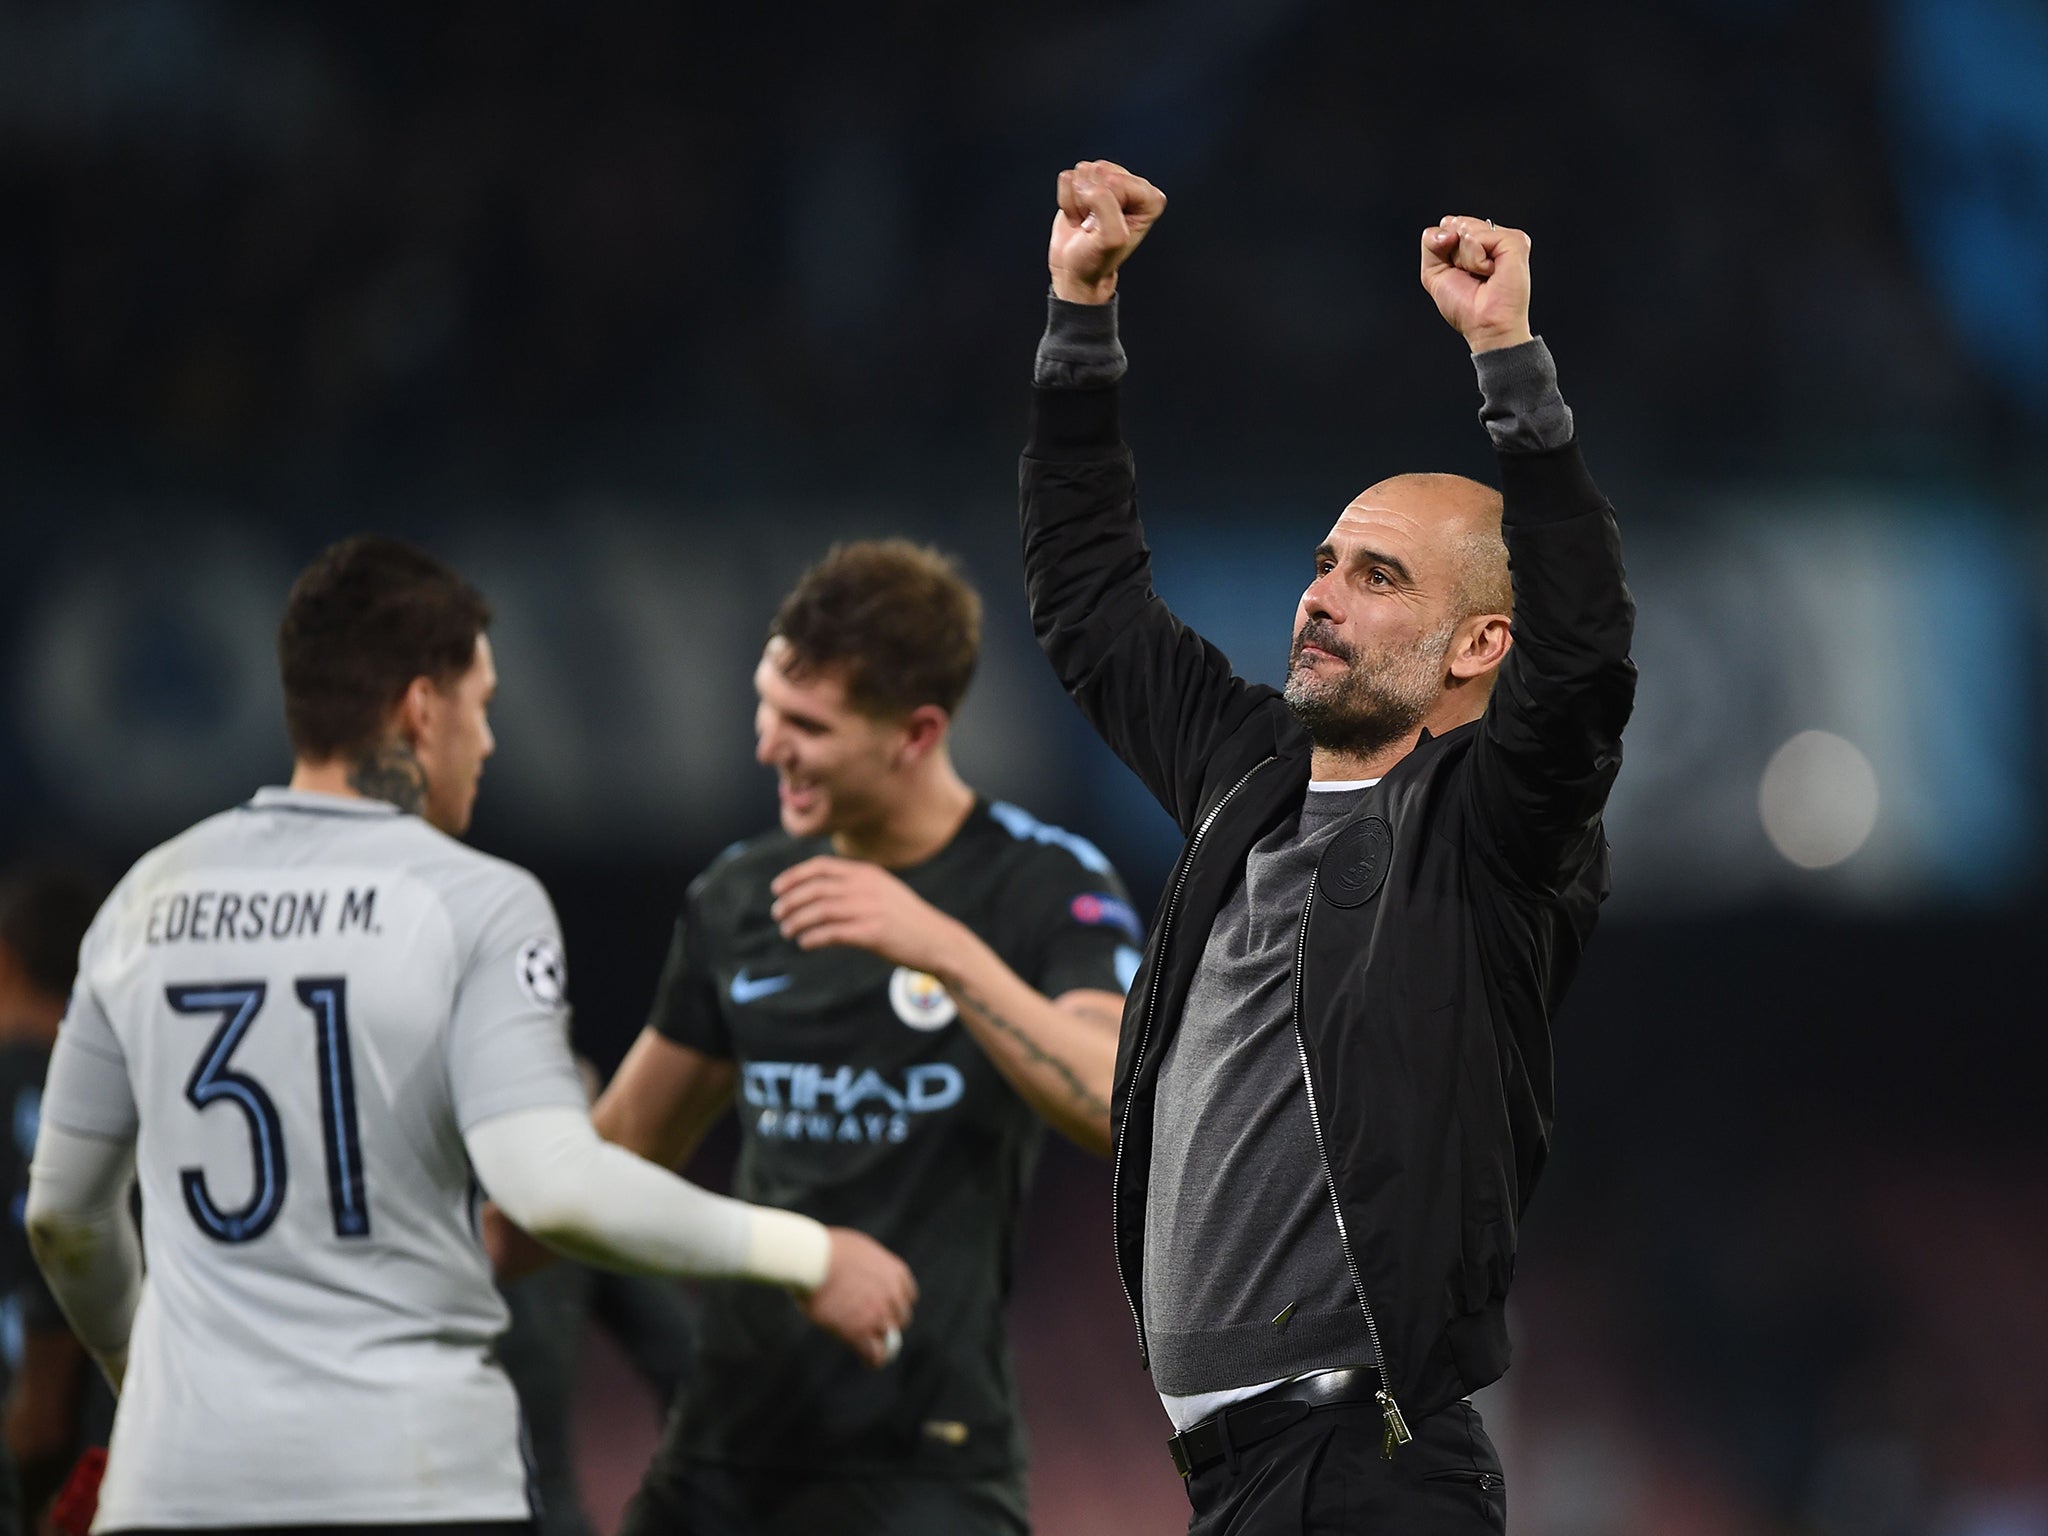 After beating Napoli and embarking on a 14-match winning streak, Manchester City can win the Champions League